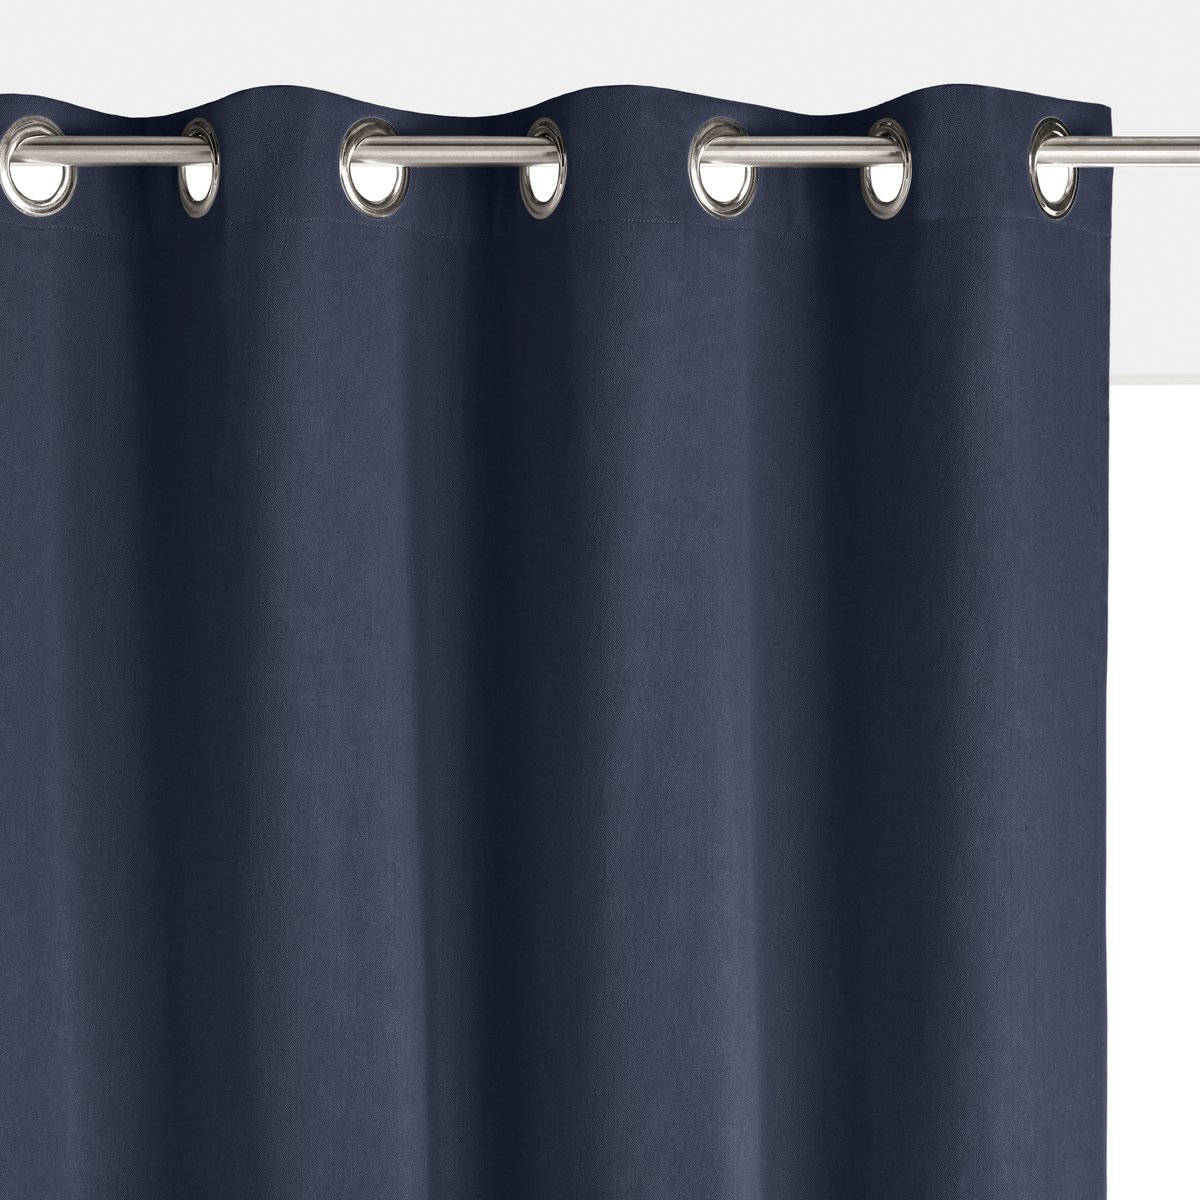 Image of Scenario Cotton Single Lined Blackout Curtain with Eyelets